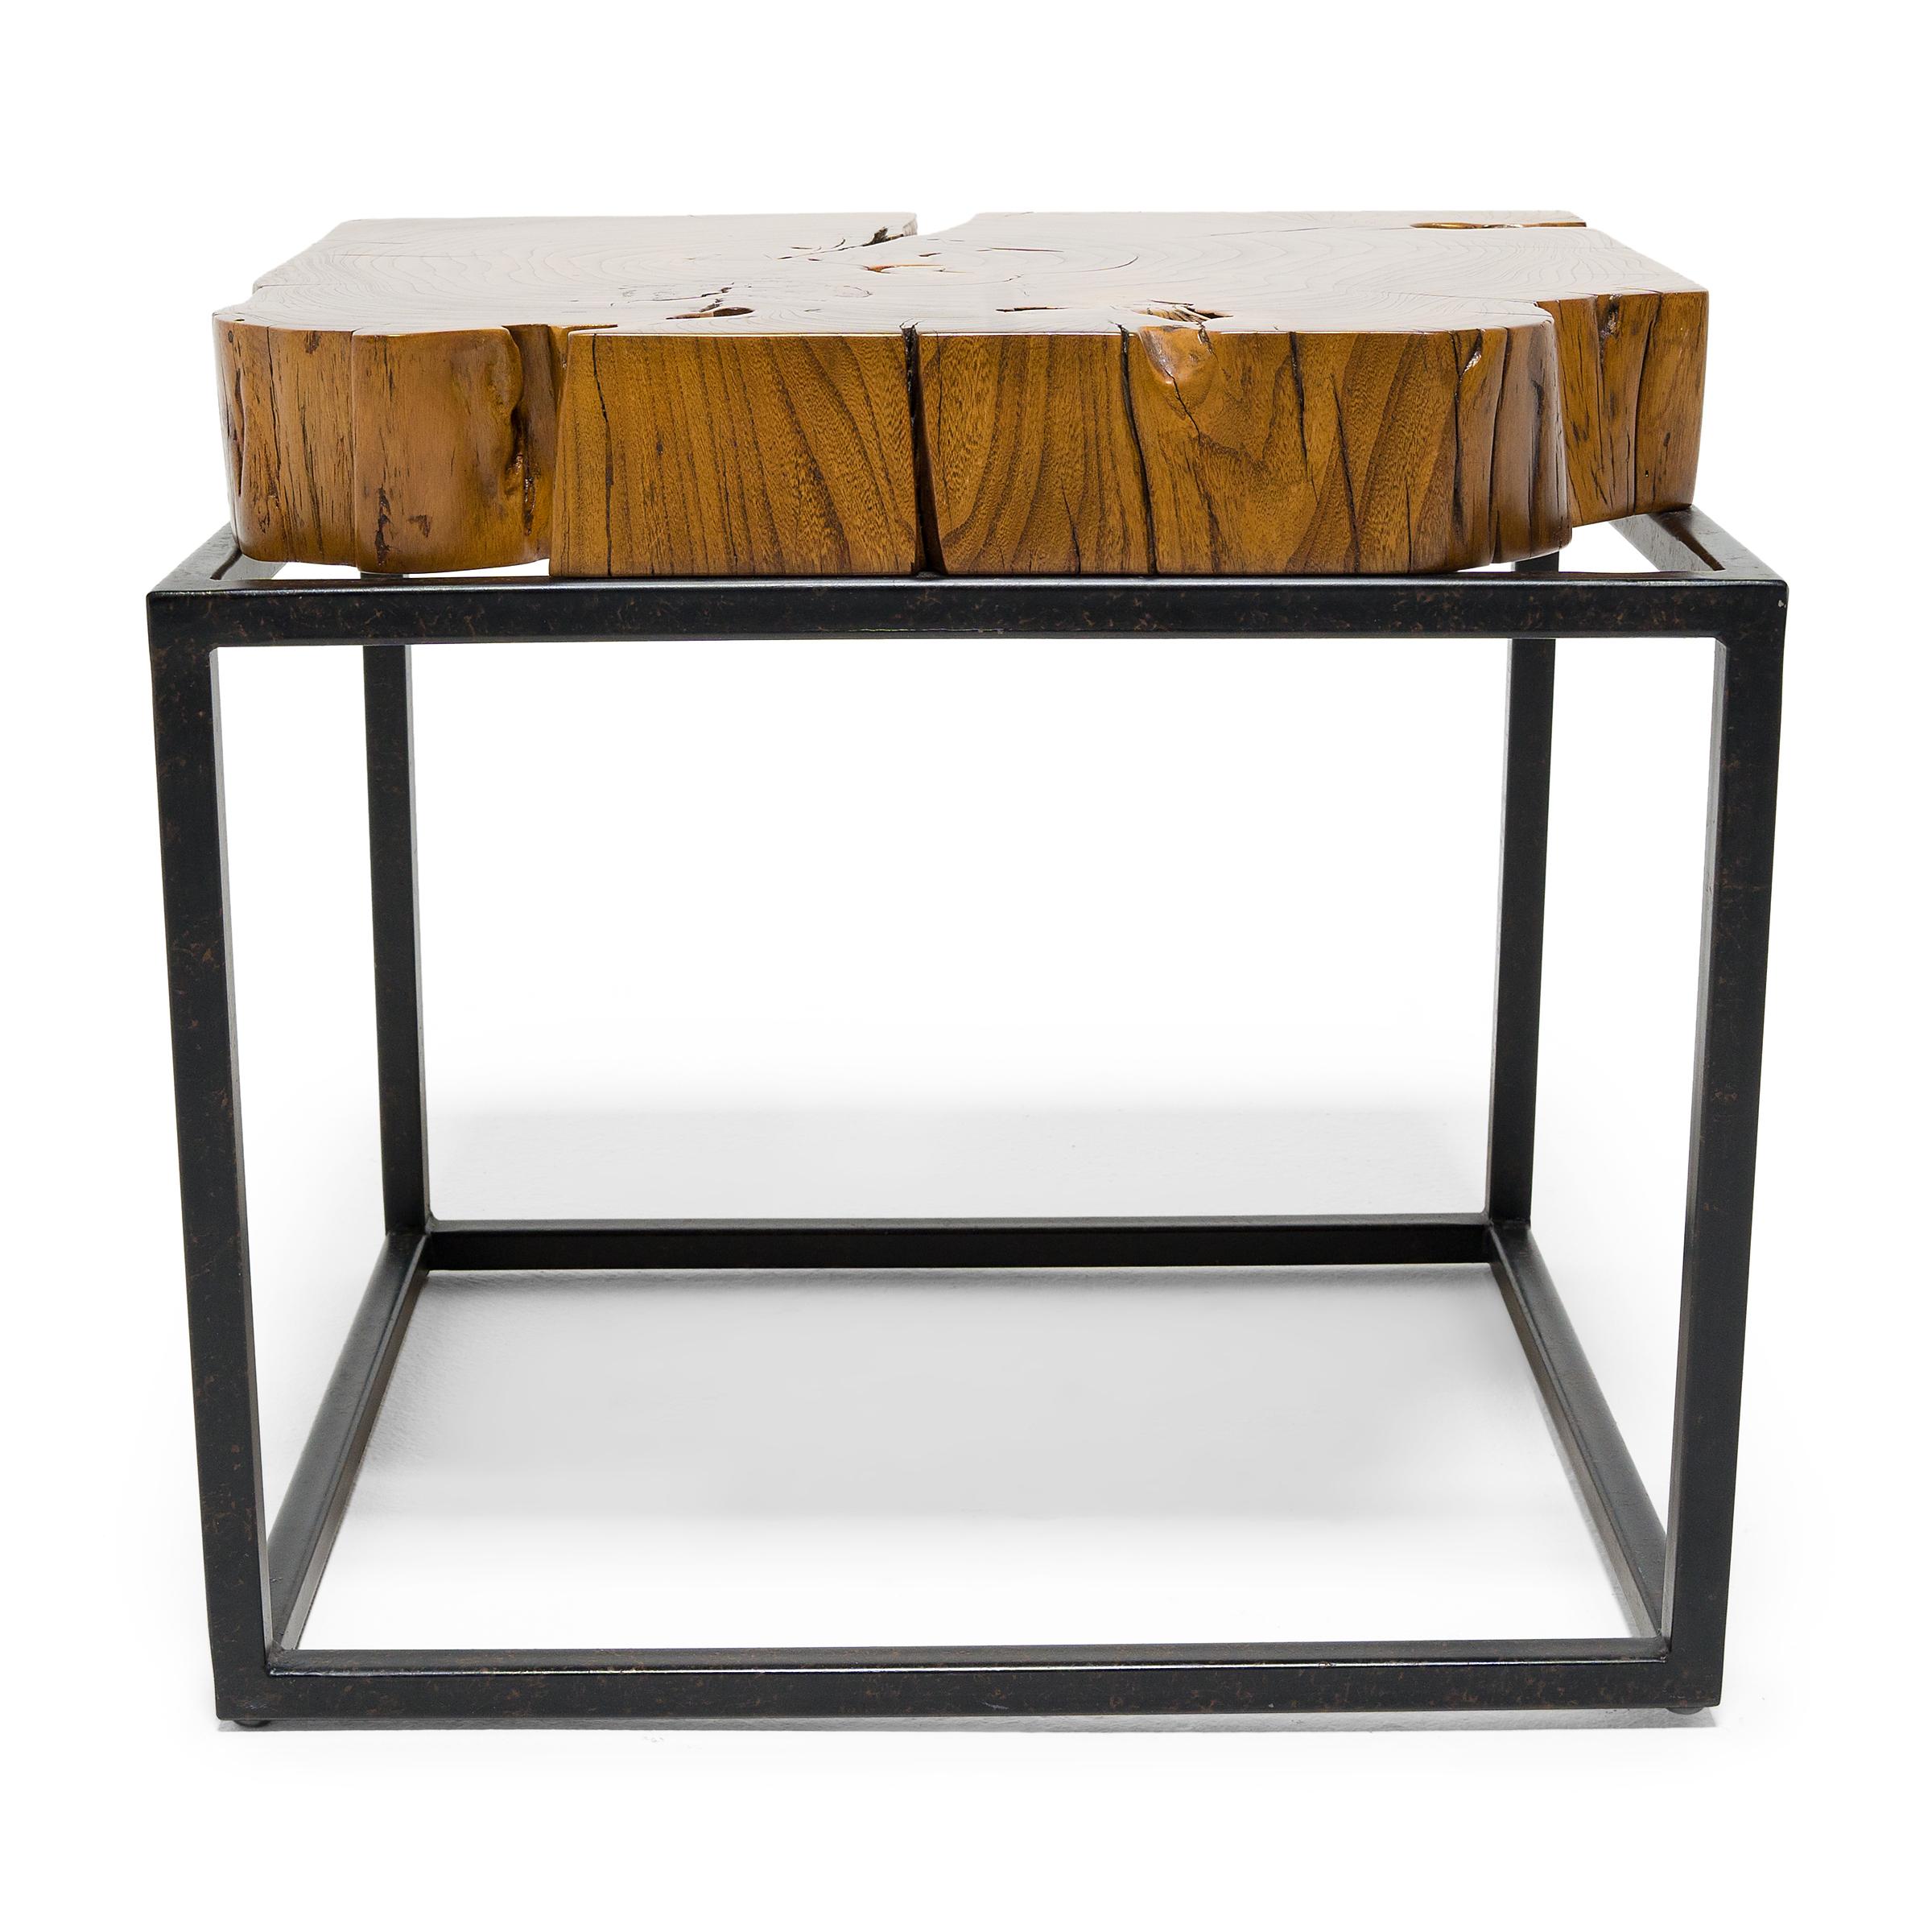 This contemporary side table from Guangzhou, China combines minimalist form with organic modern textures. The reclaimed tabletop is a gorgeous cross-section of Chinese northern elm (yumu), selected for its density, warm coloring, and beautiful grain